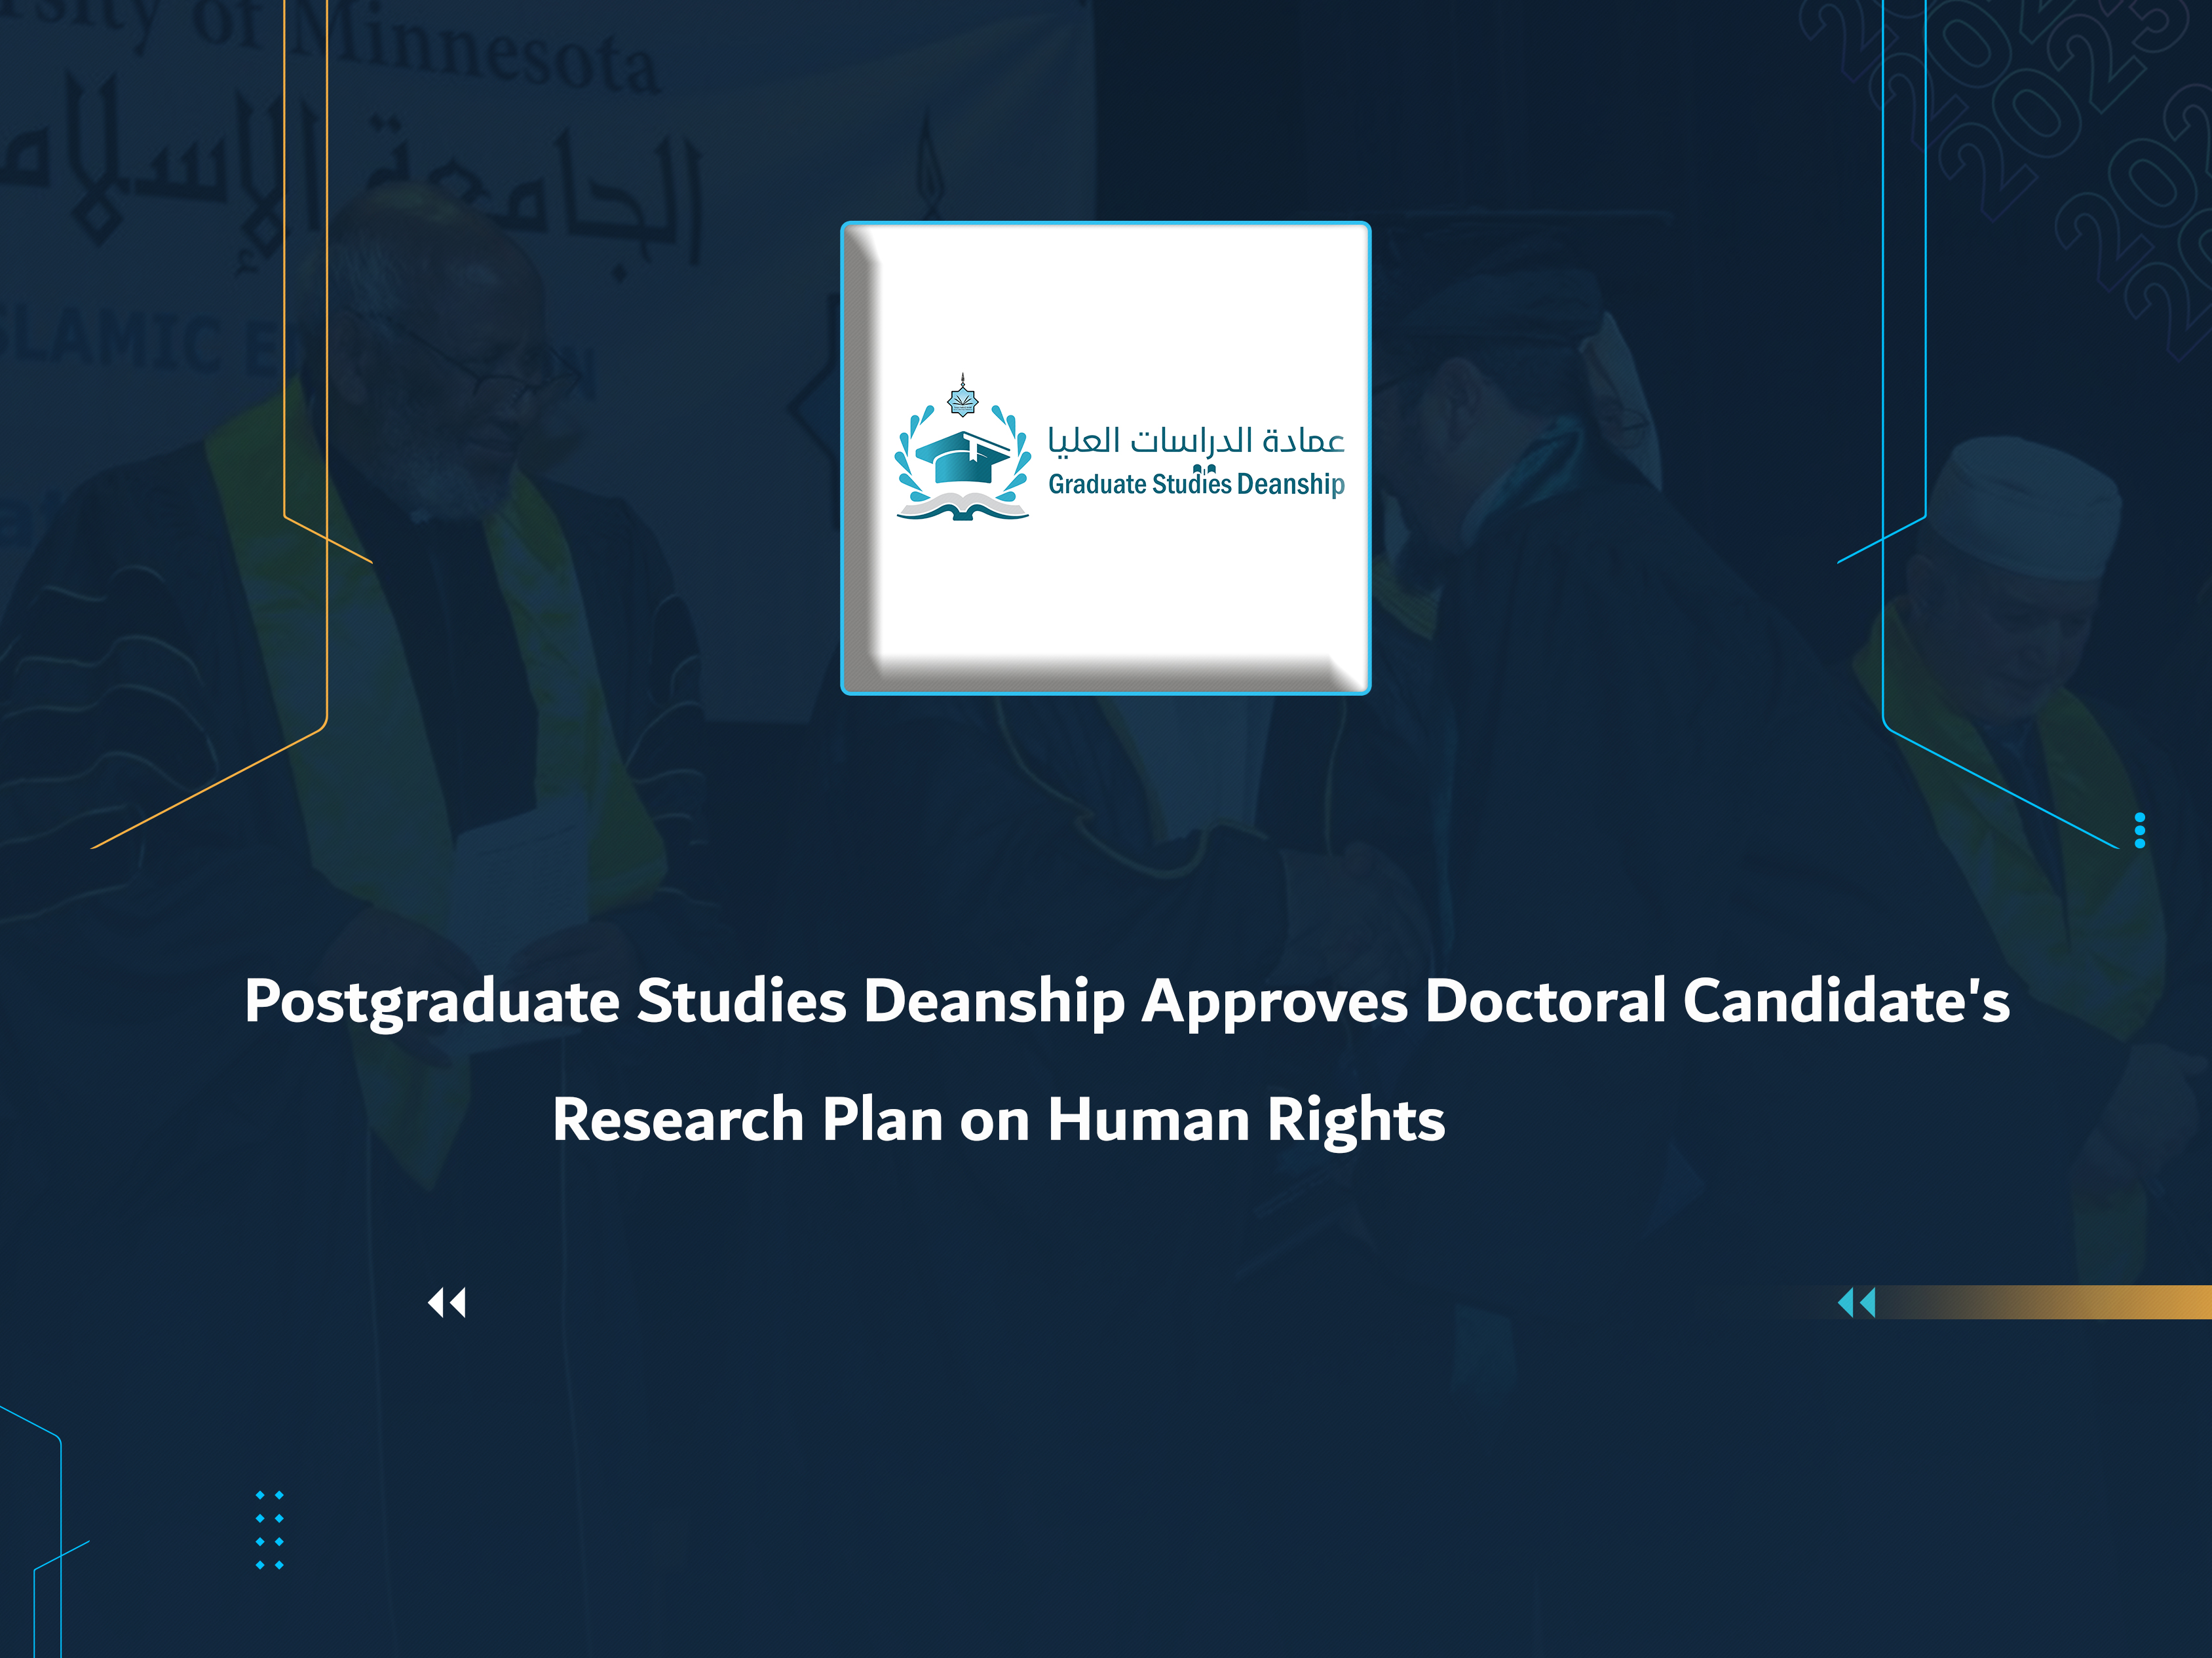 Postgraduate Studies Deanship Approves Doctoral Candidate's Research Plan on Human Rights